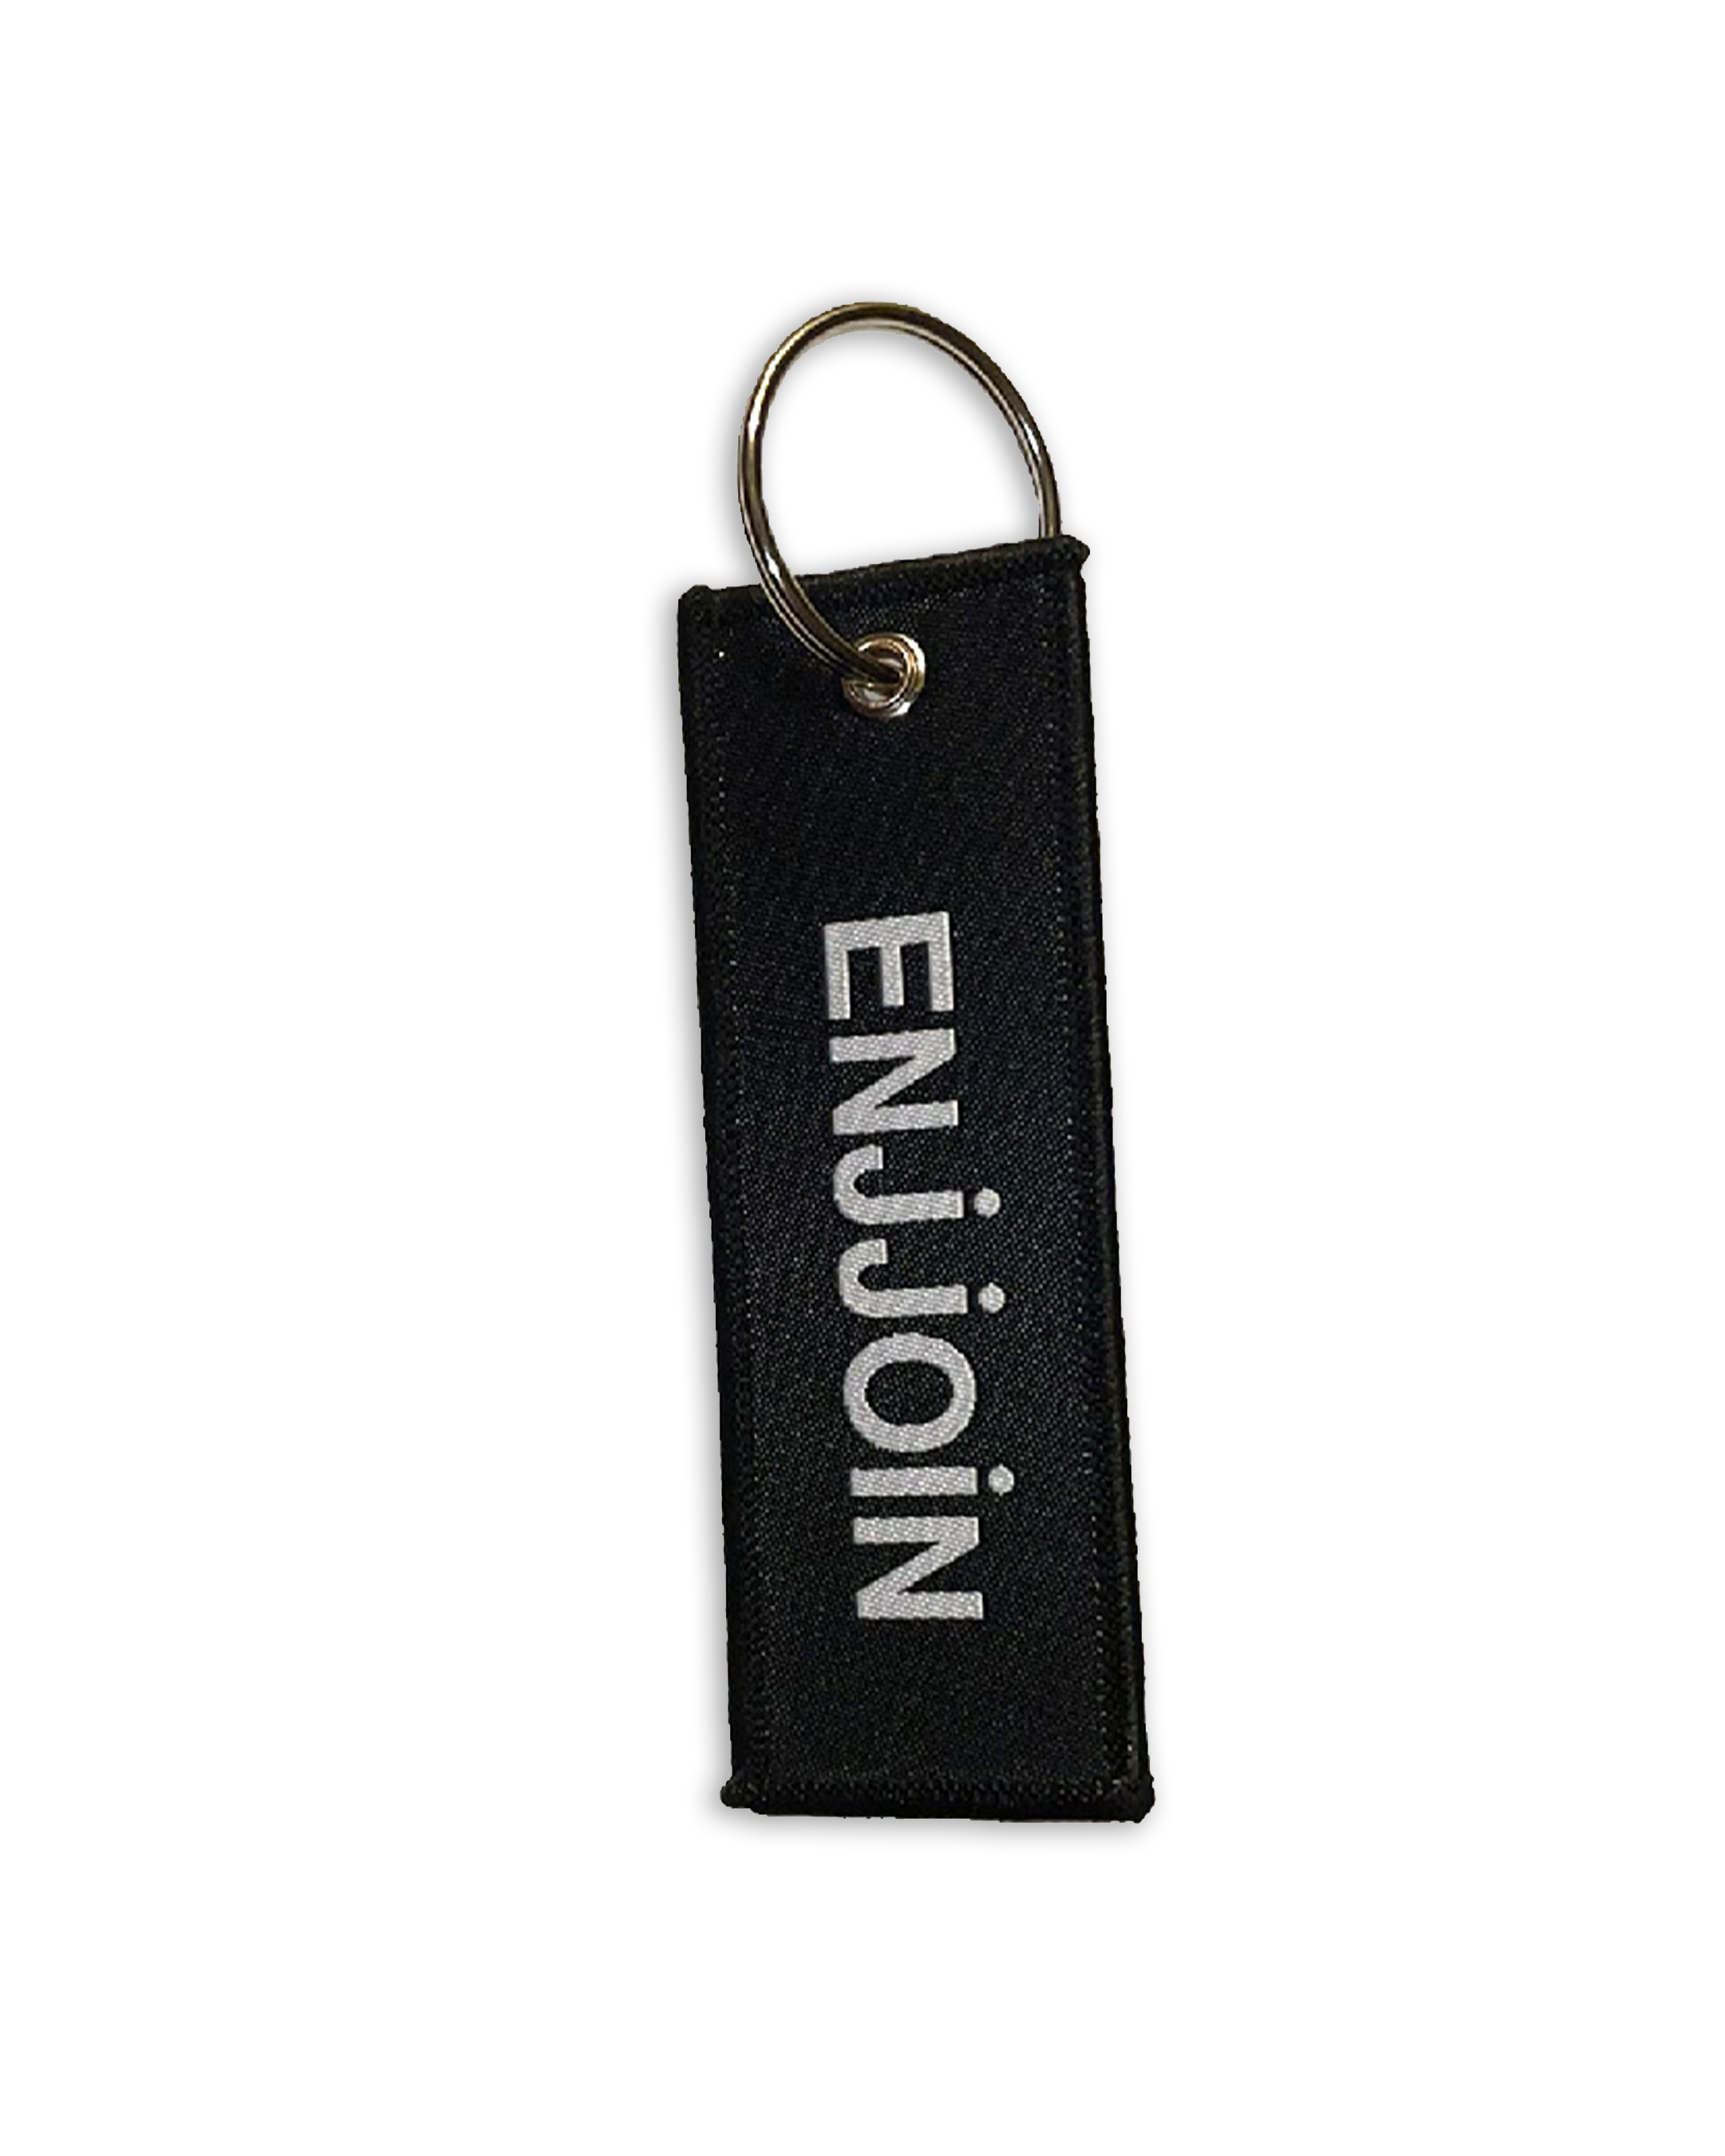 "Where the f*** are my keys?" - Keychain